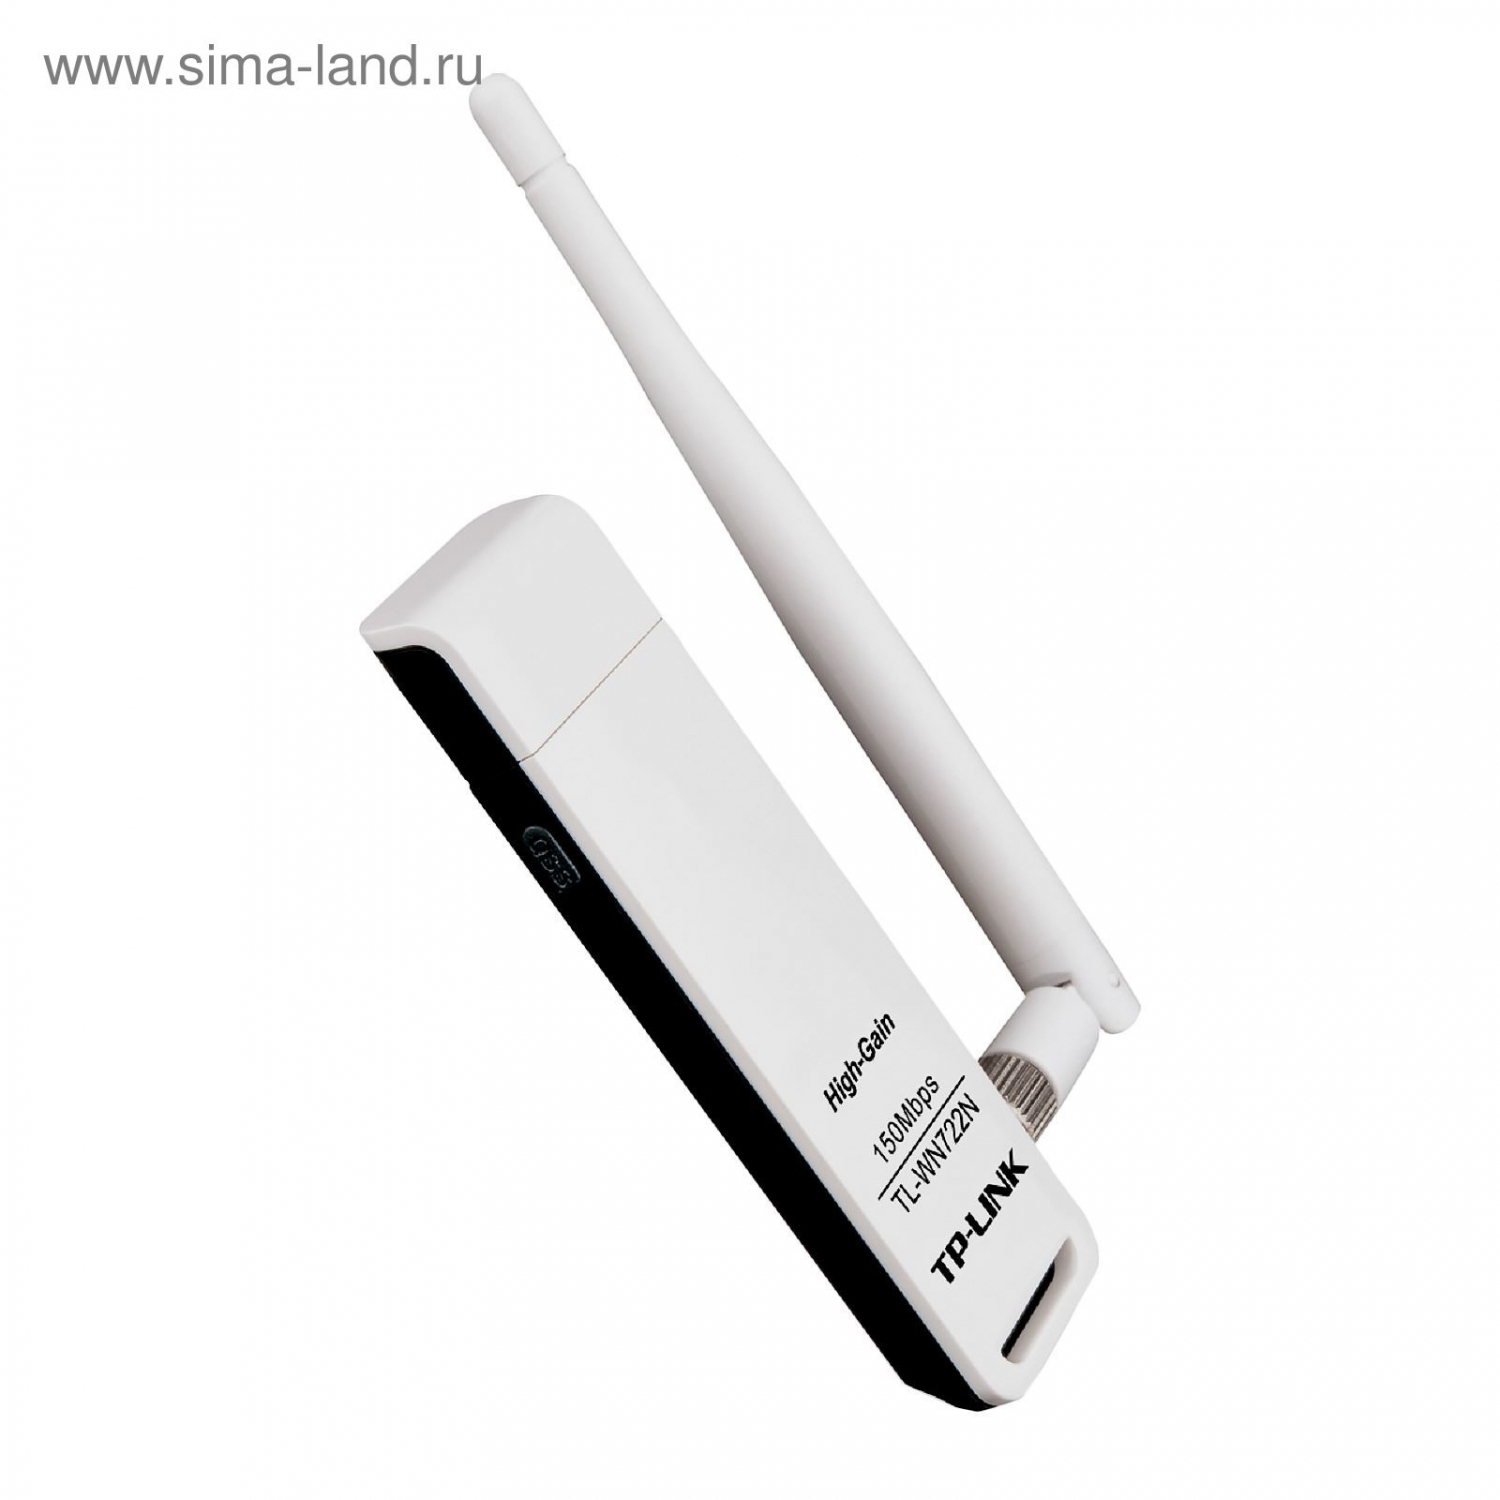 Tp link high. Wi-Fi адаптер TP-link Archer t2uh. USB TP-link TL-wn722n. WIFI TP link TL wn722n. TP link USB Adapter TL-wn722n.